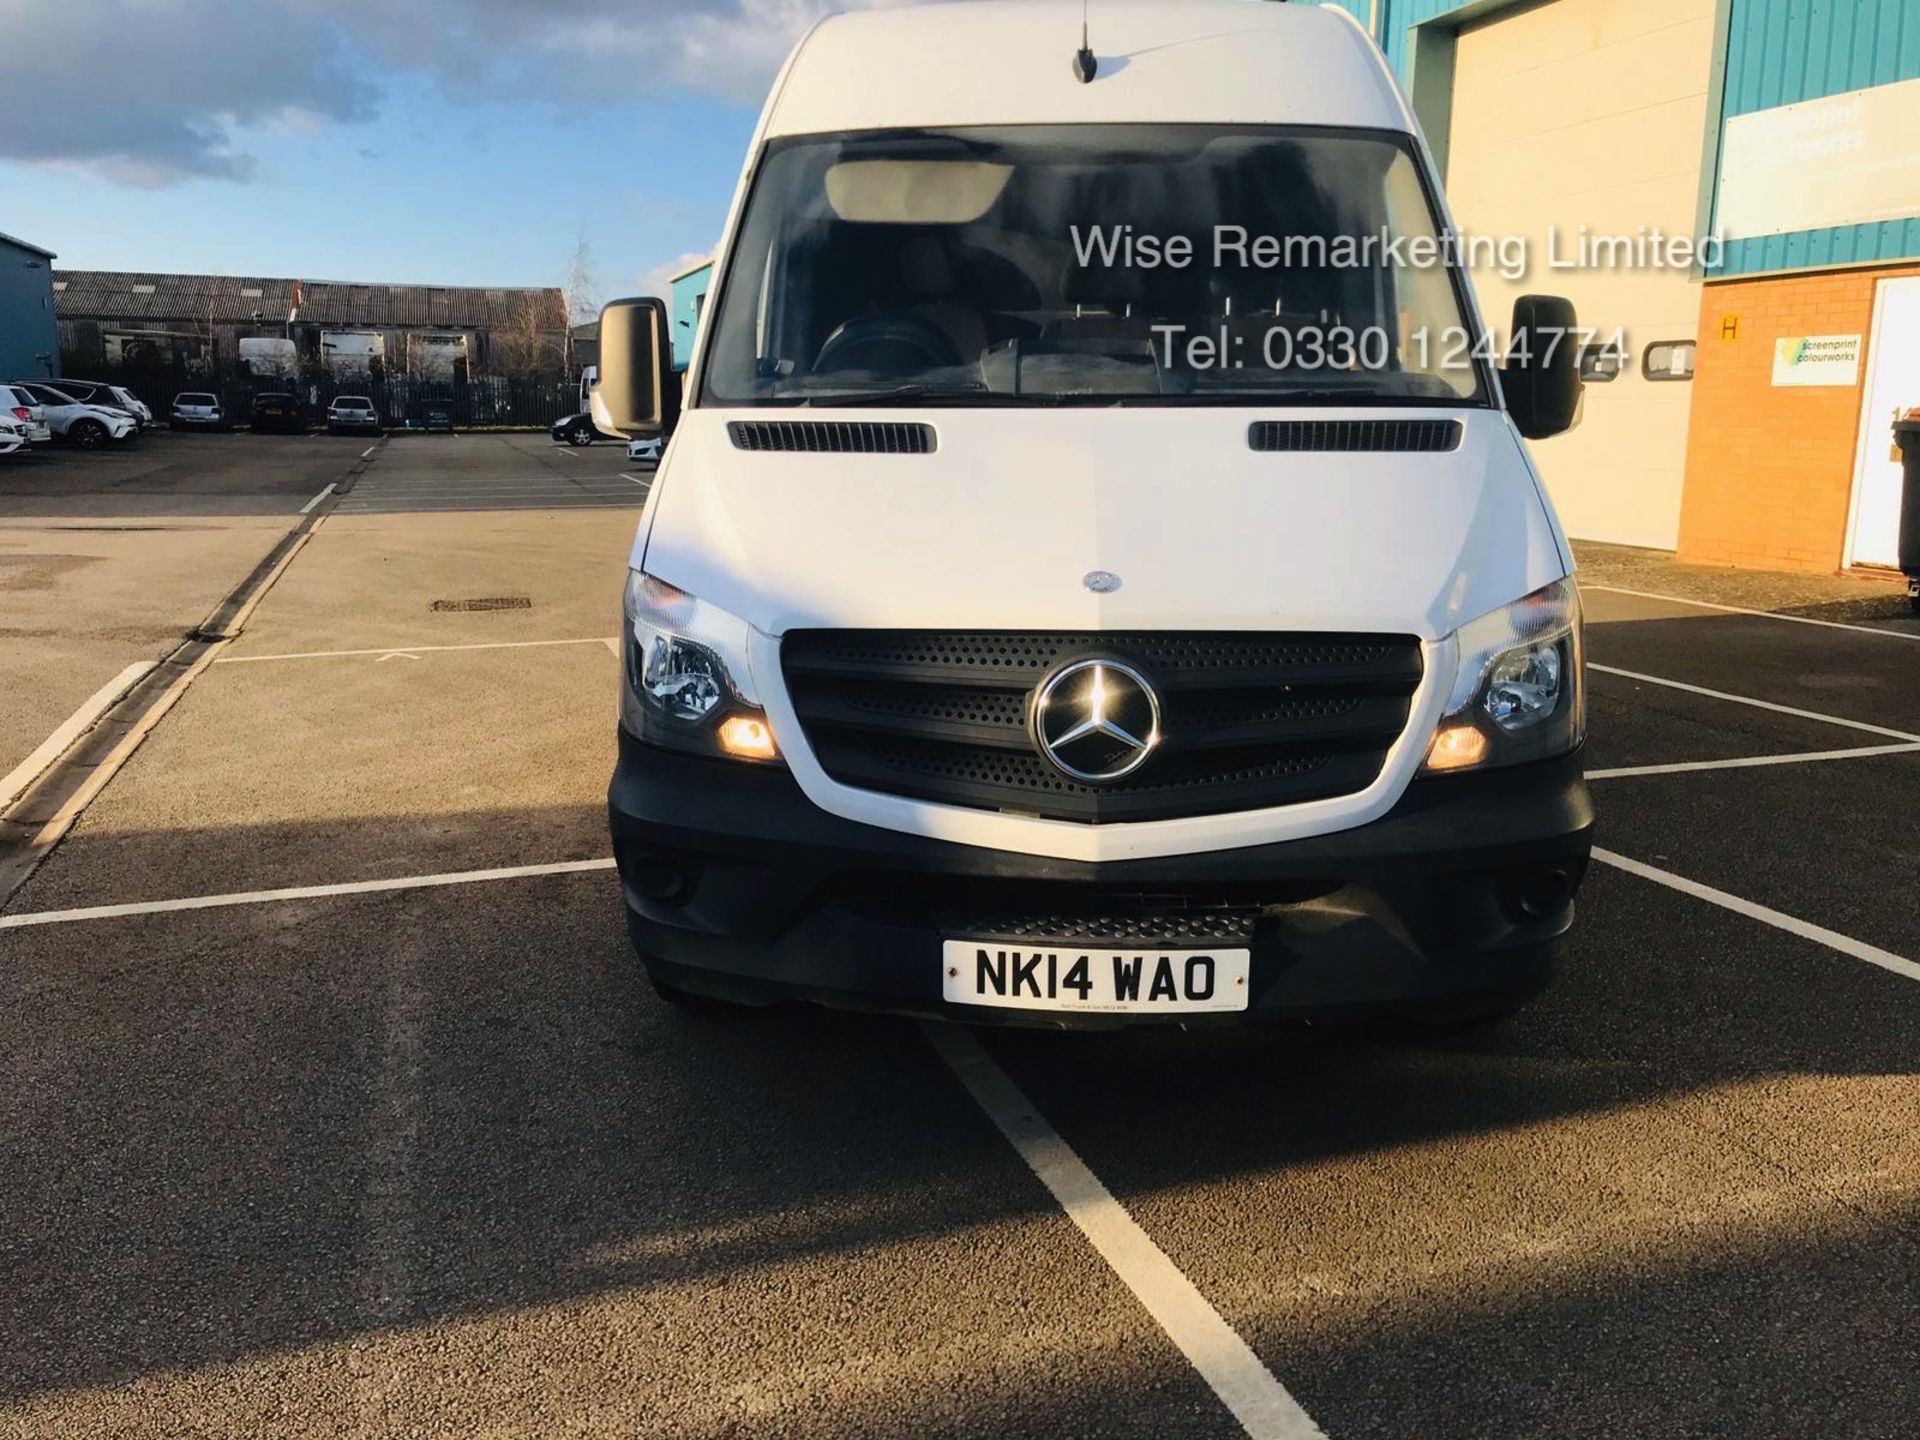 Mercedes Sprinter 313 CDI 2.1 TD 6 Speed - 2014 14 Reg - 1 Keeper From New - Image 2 of 18